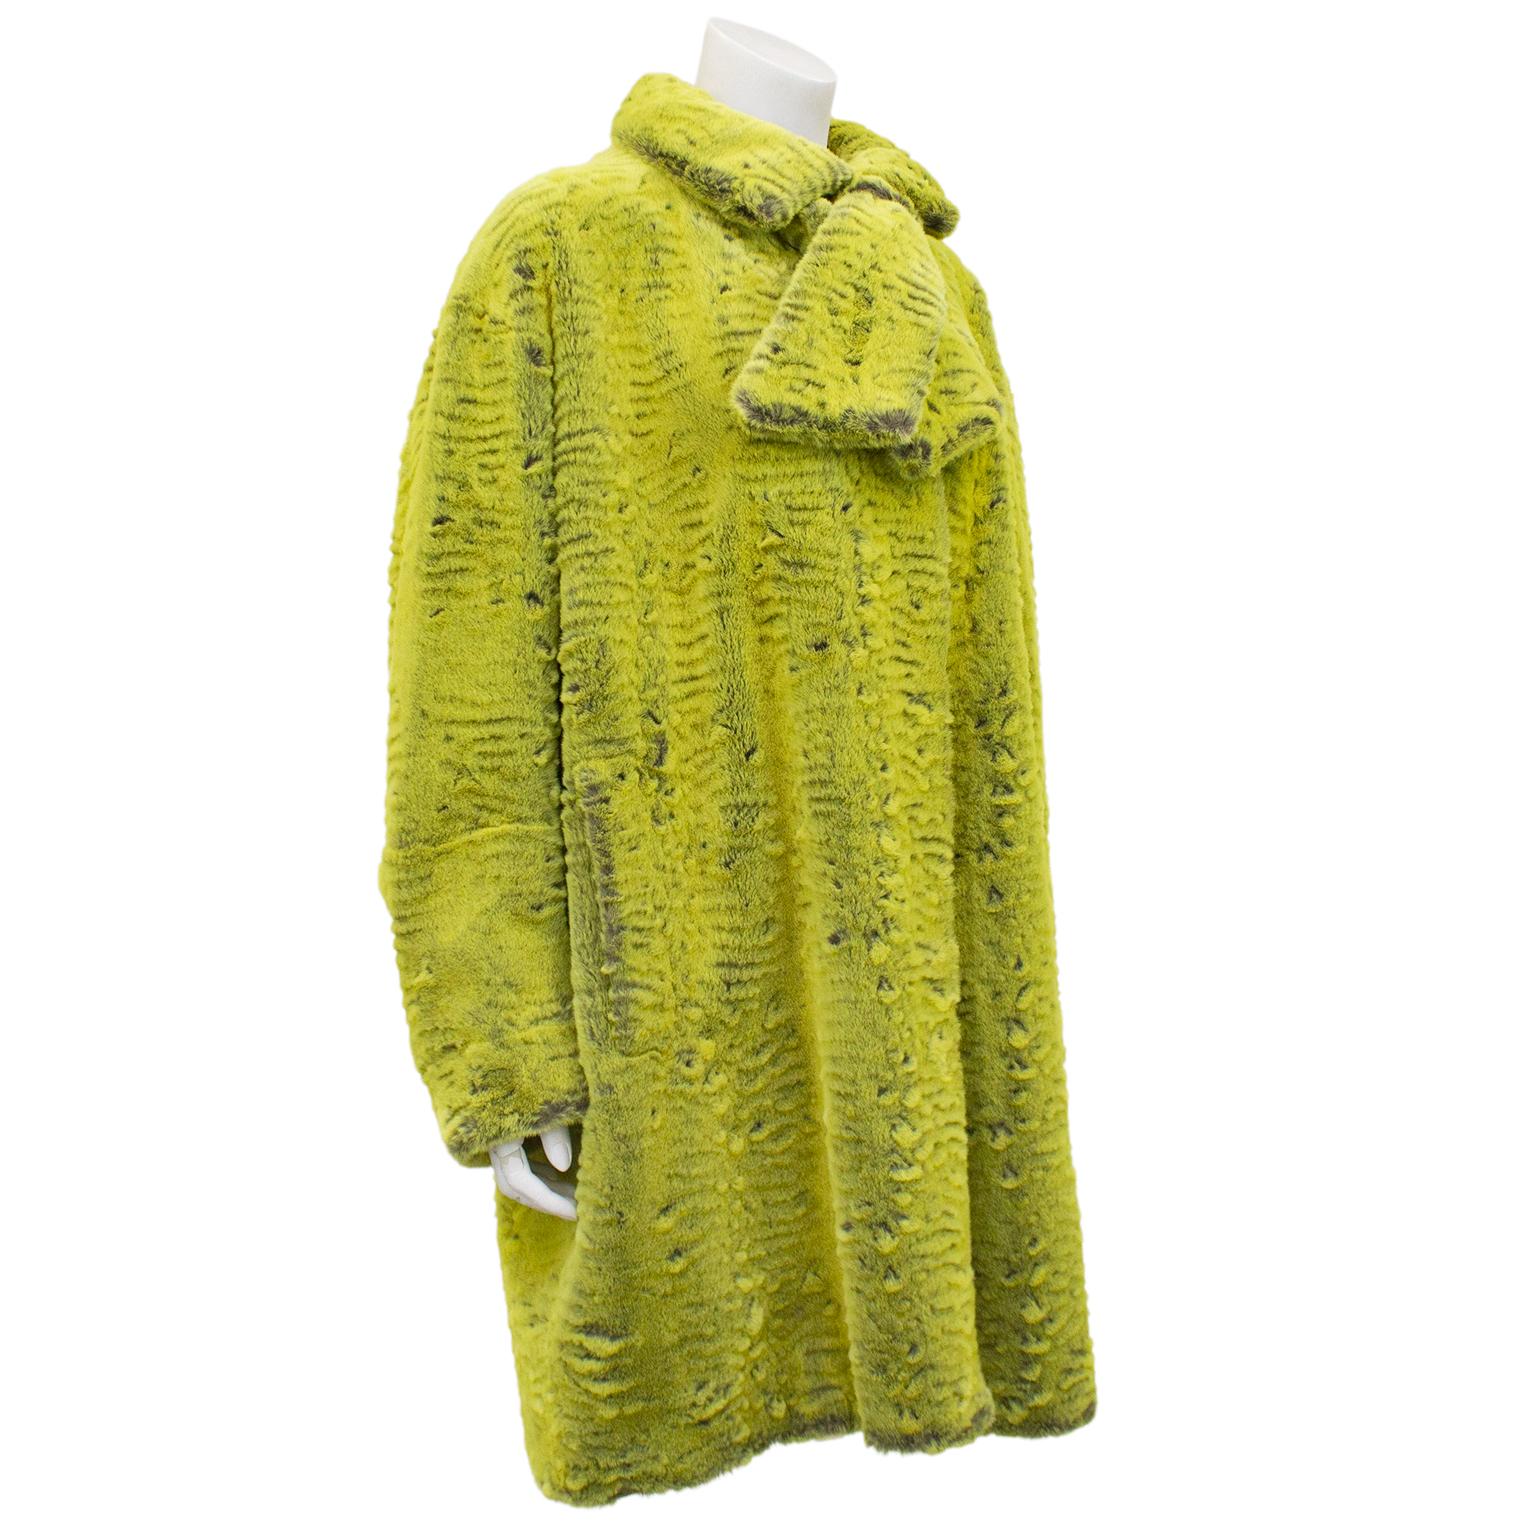 1990s gorgeous chartreuse faux fur coat by Christian Lacroix. Swing style with short scarf that is attached to the collar. Hidden buttons up centre front and vertical slit pockets. Black lining contrasts against the iconic hot pink Lacroix label.